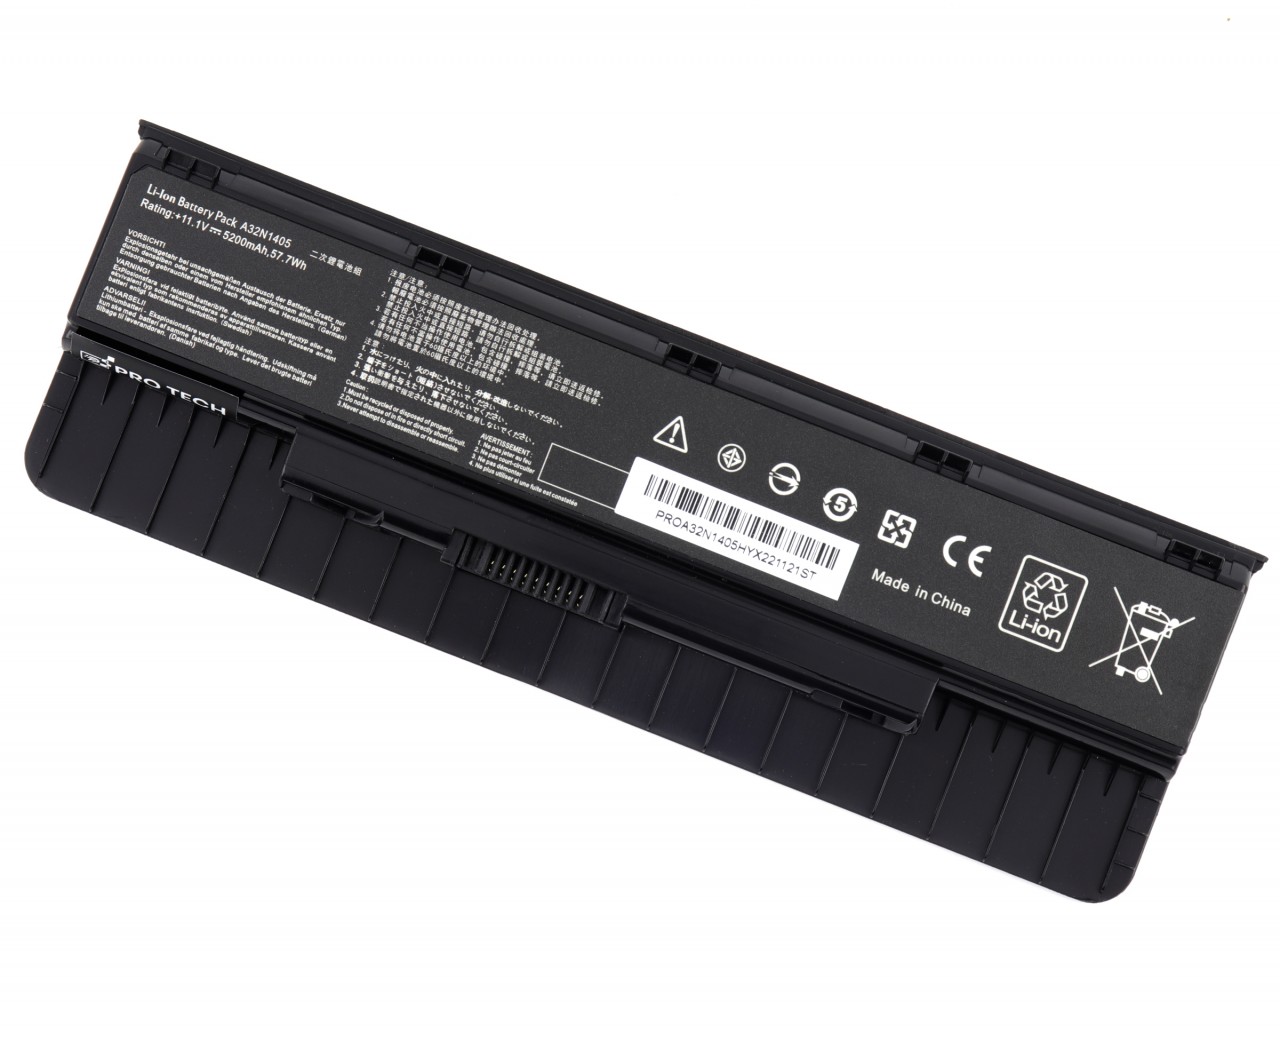 Baterie Asus N56D 57.7Wh / 5200mAh Protech High Quality Replacement